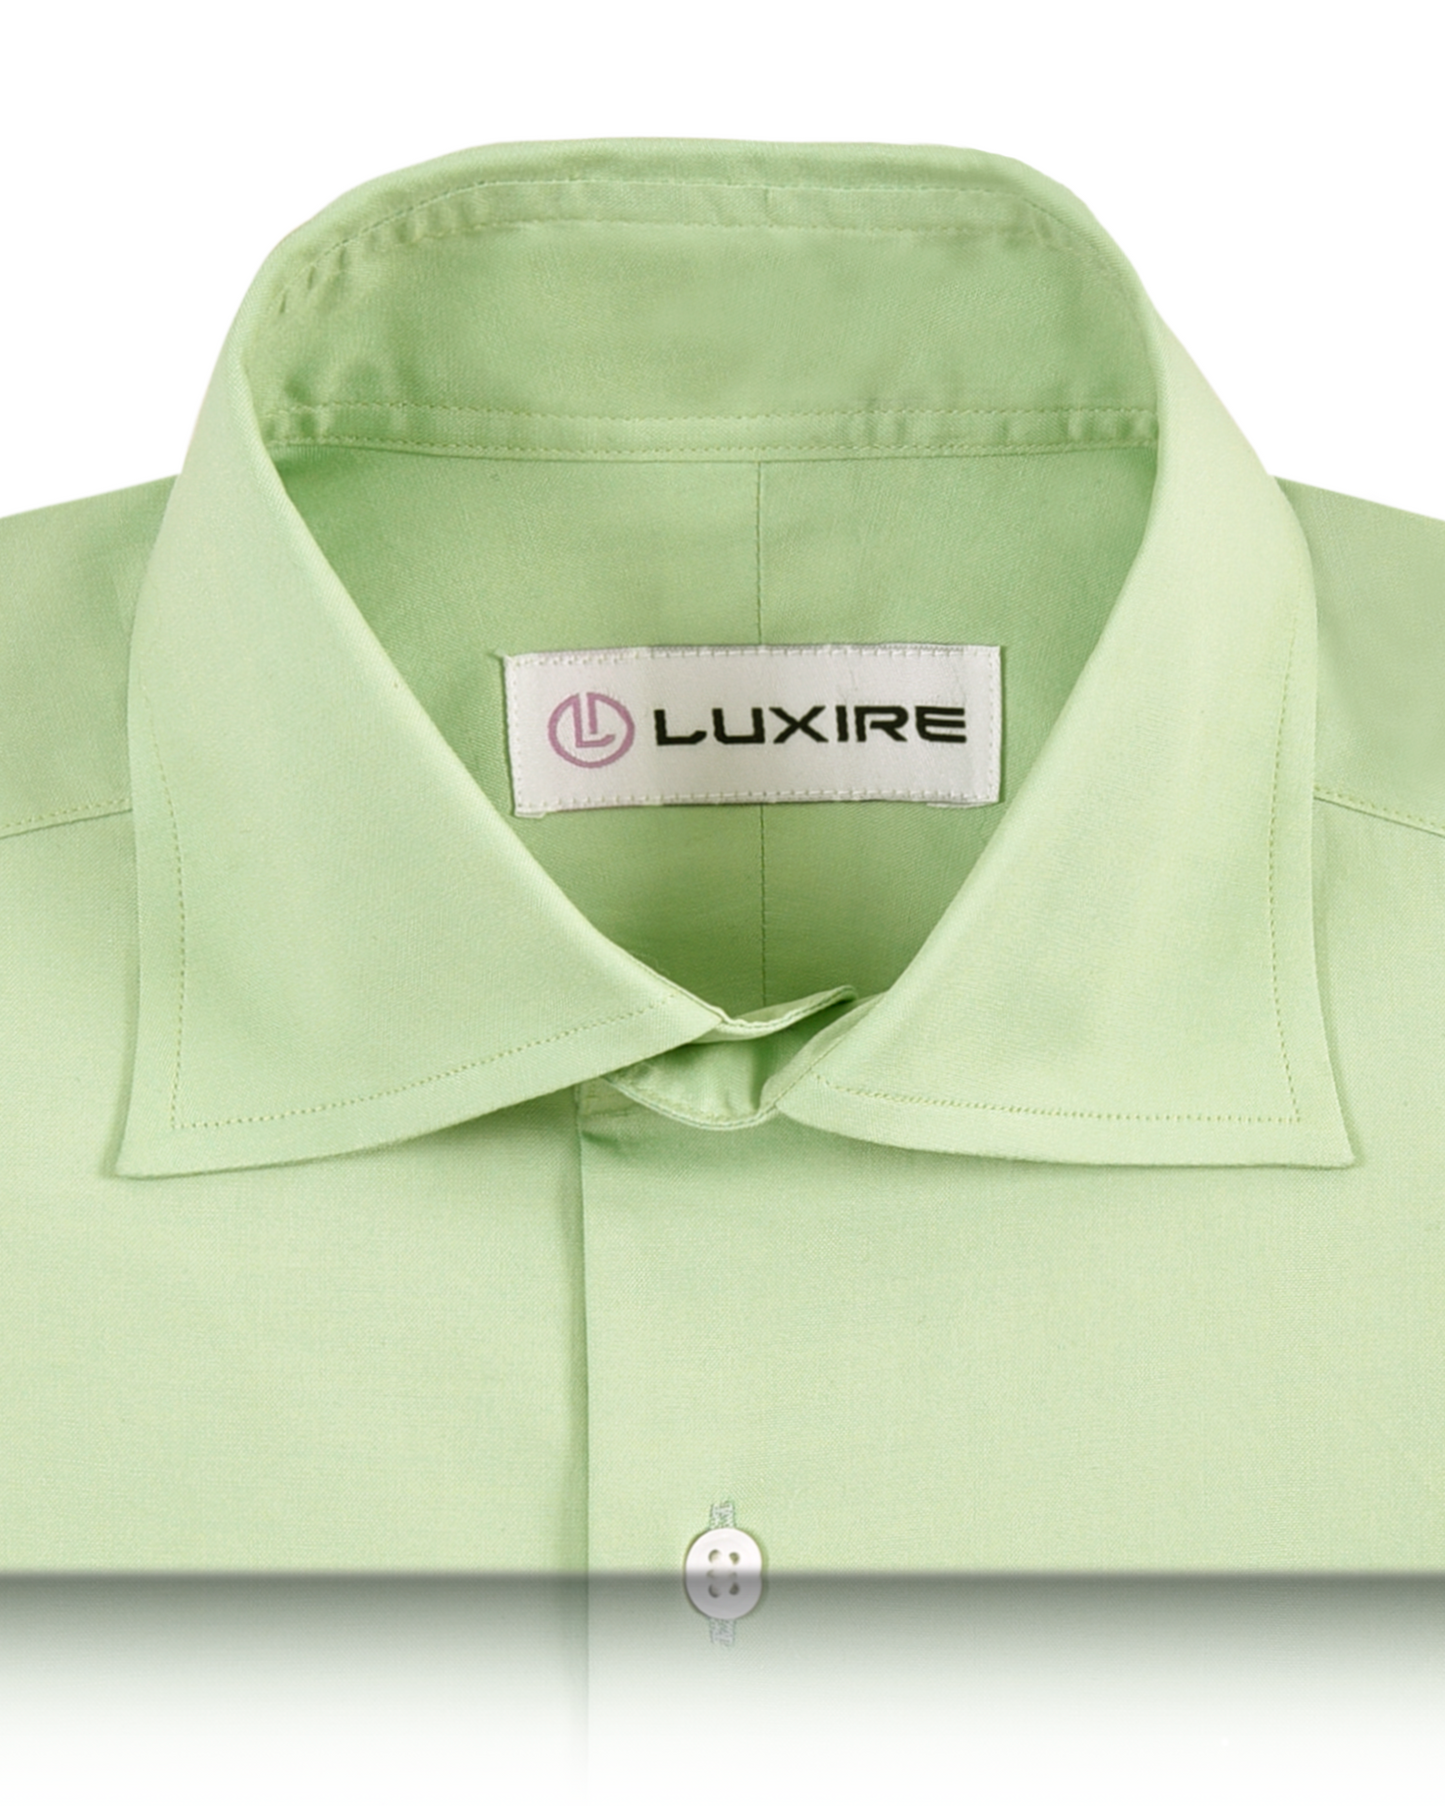 Collar of the custom oxford shirt for men by Luxire in light green pinpoint